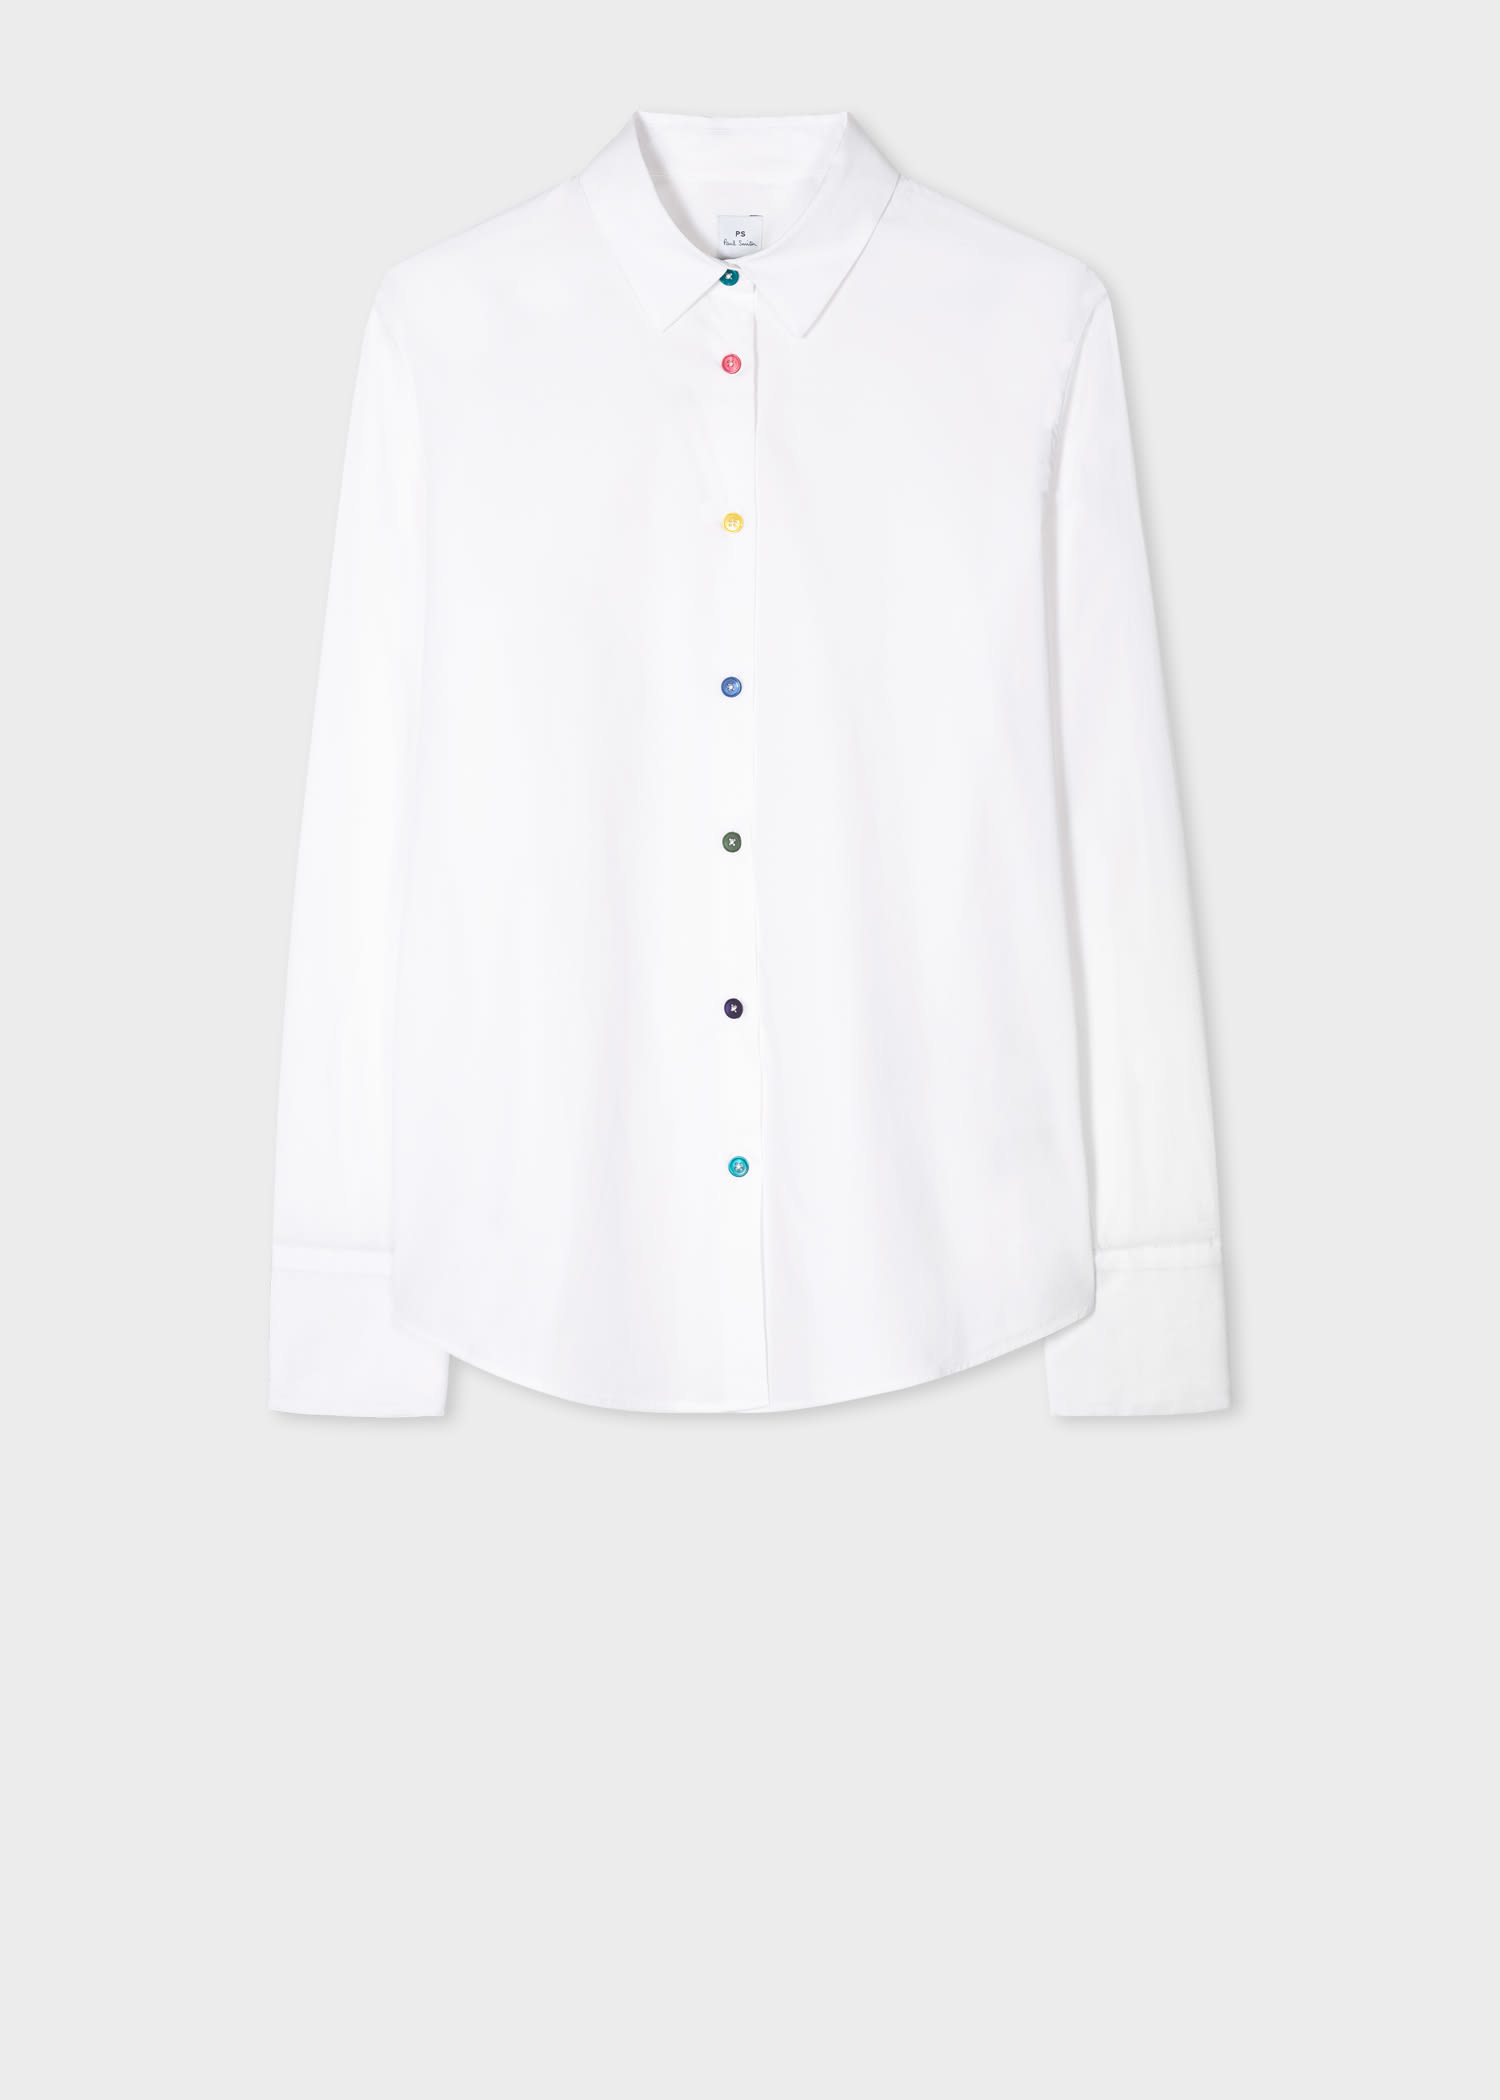 Women's Shirts & Blouses | Satin & Silk, Floral & Checked - Paul Smith ...